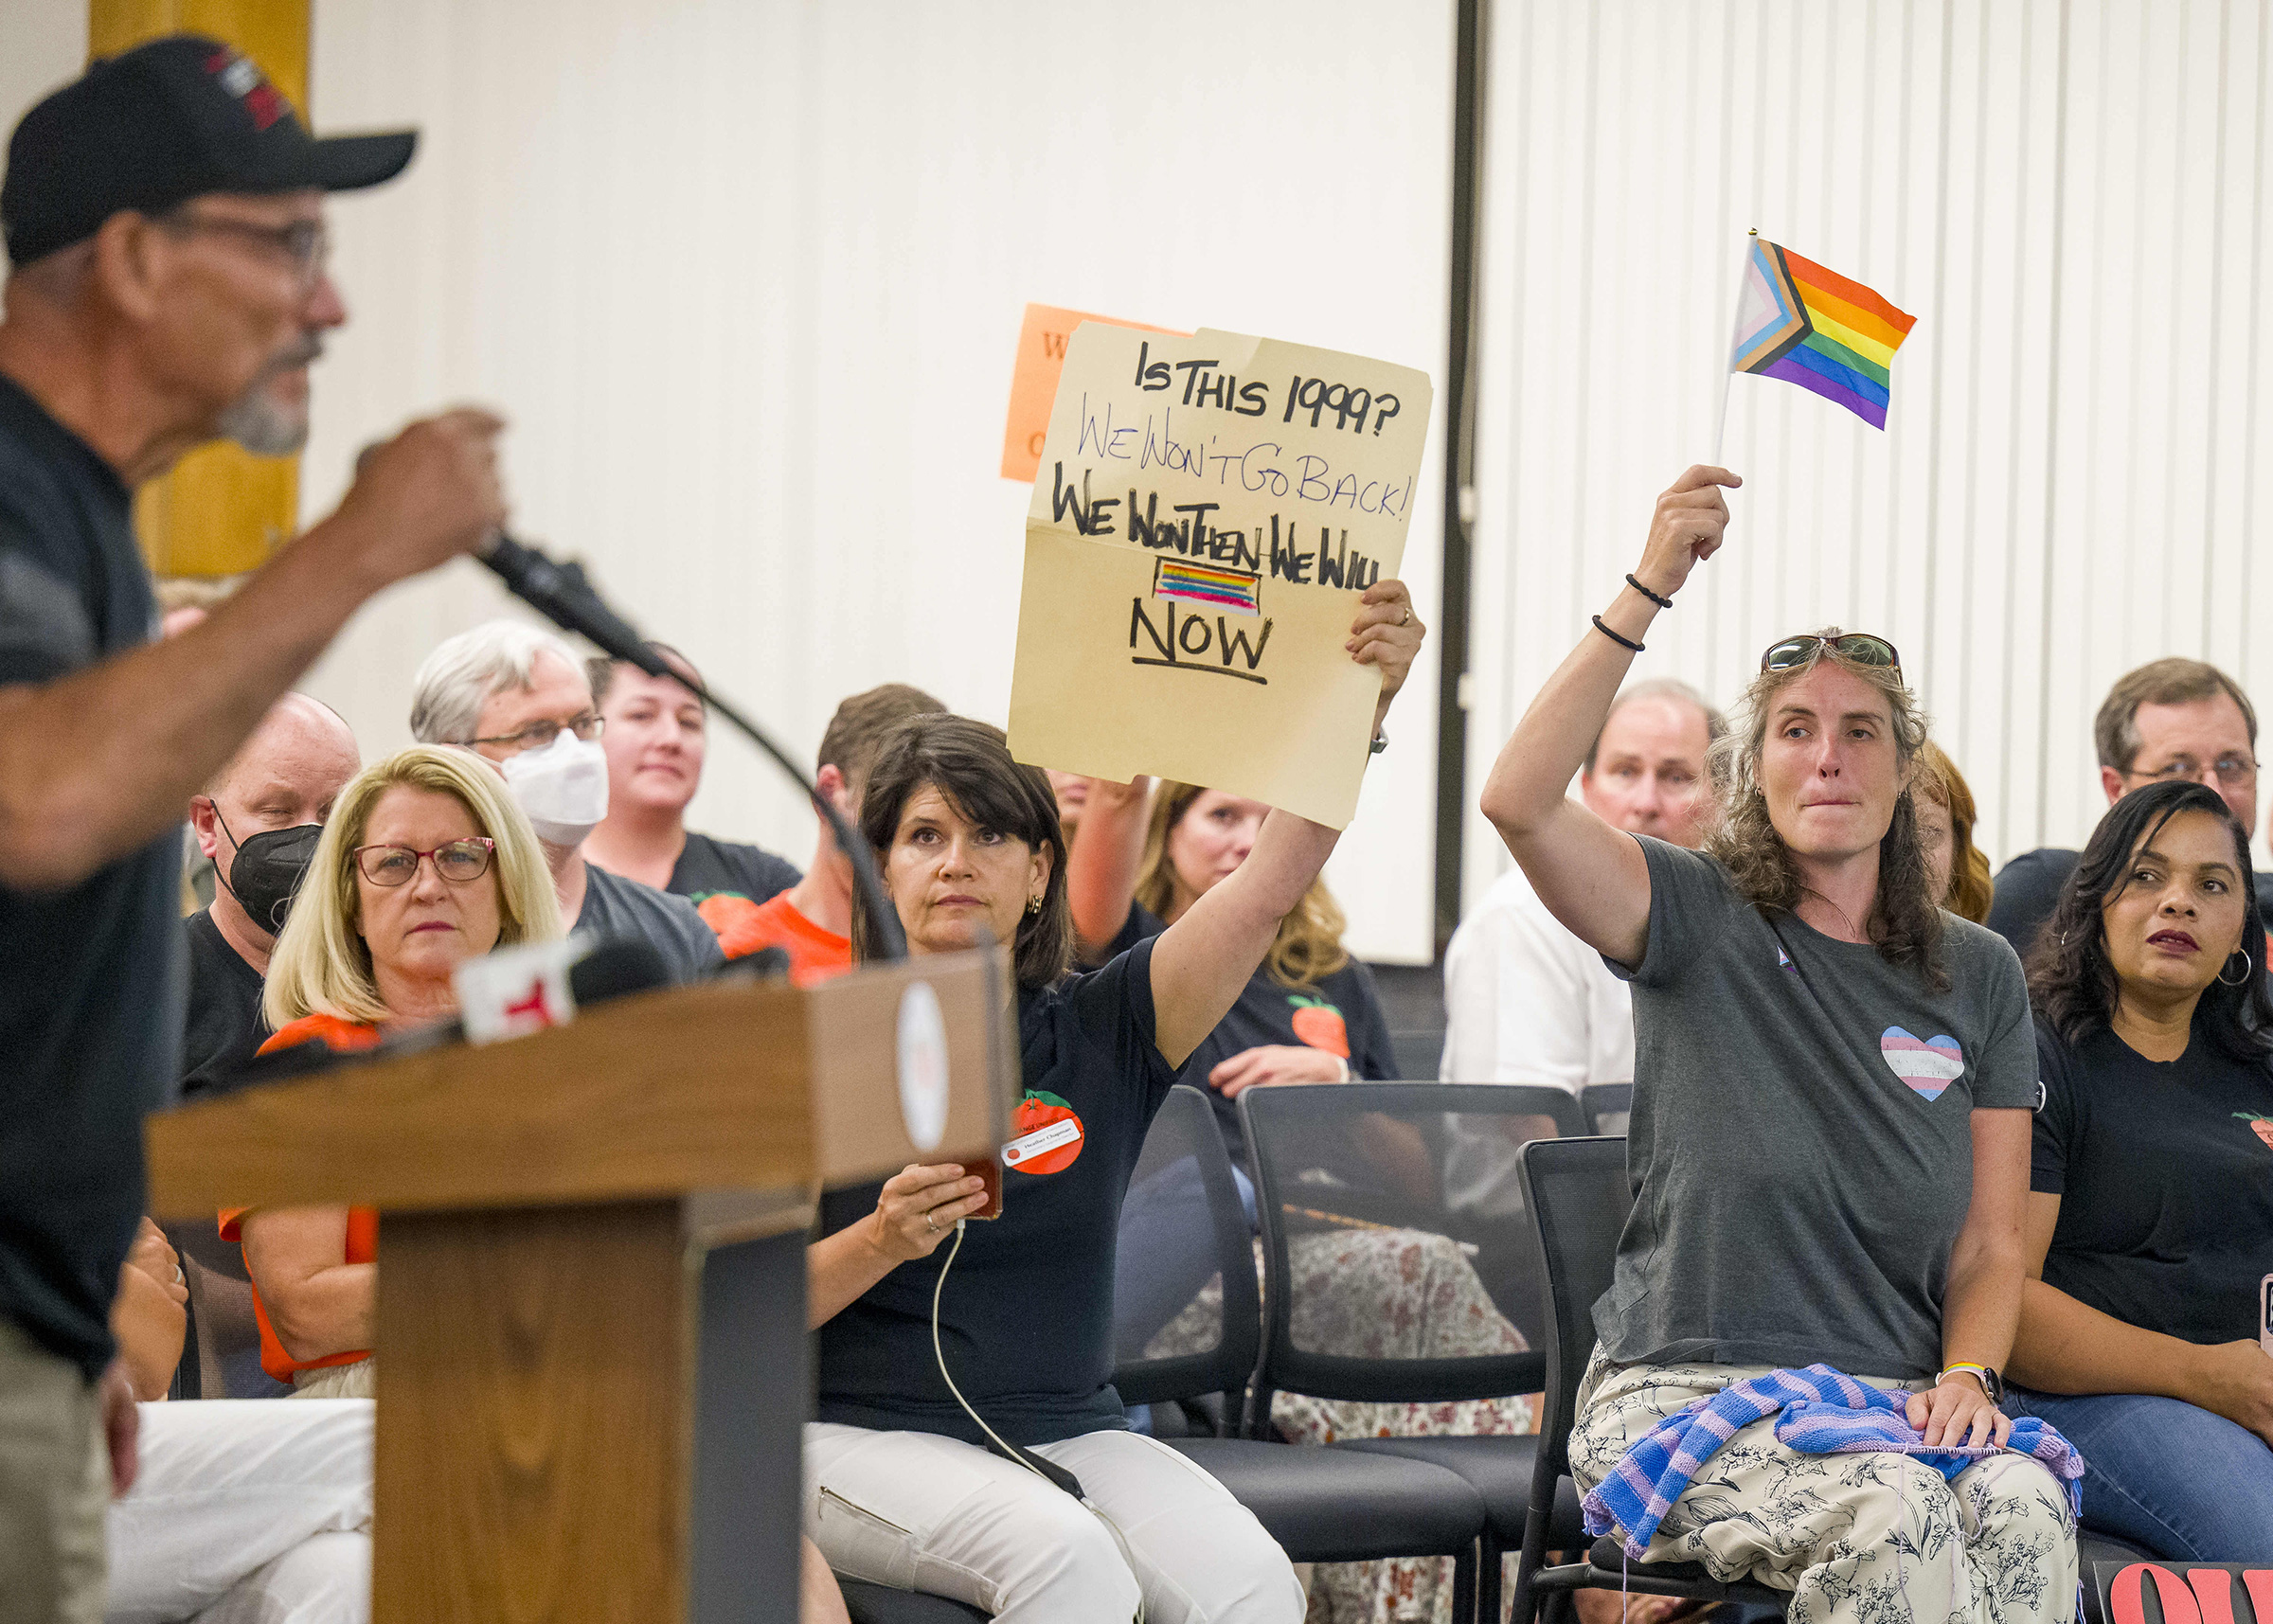 People opposed to a proposed policy that would require school staff to notify parents that their child is transgender, right, react to a speaker in favor of the policy during a meeting of the Orange Unified School District in Orange County, Calif., on Aug. 17, 2023. (MediaNews/Getty Images)